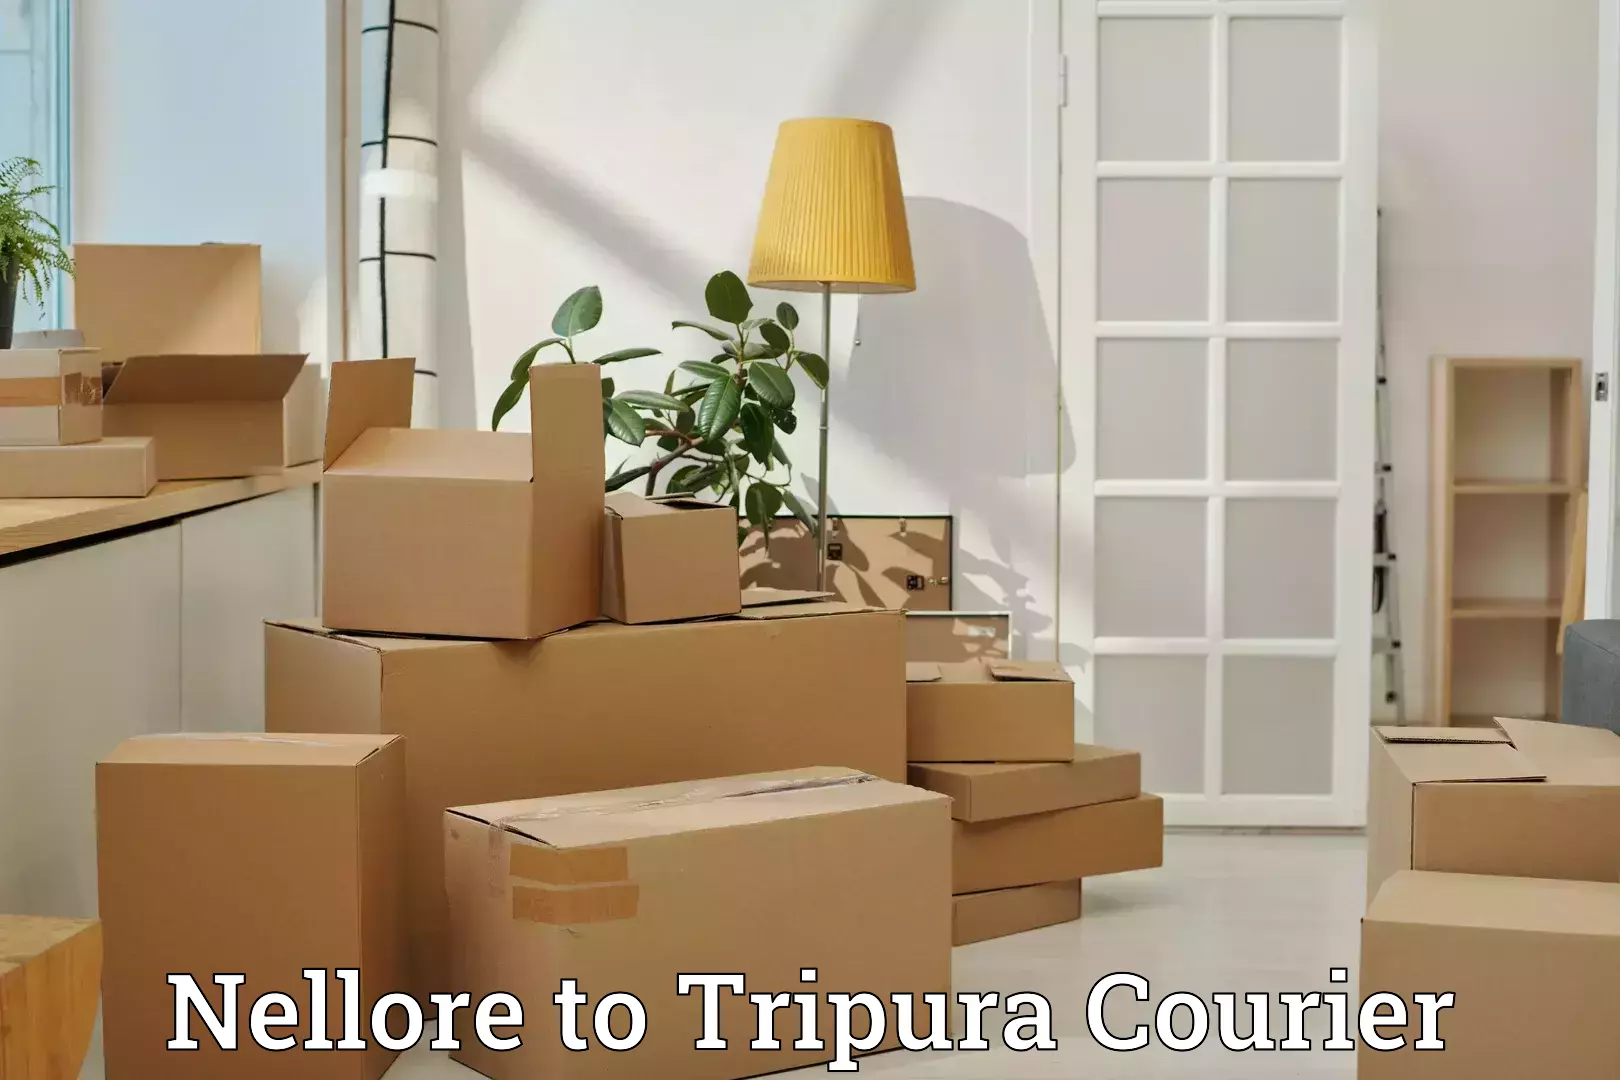 Baggage transport network Nellore to Udaipur Tripura